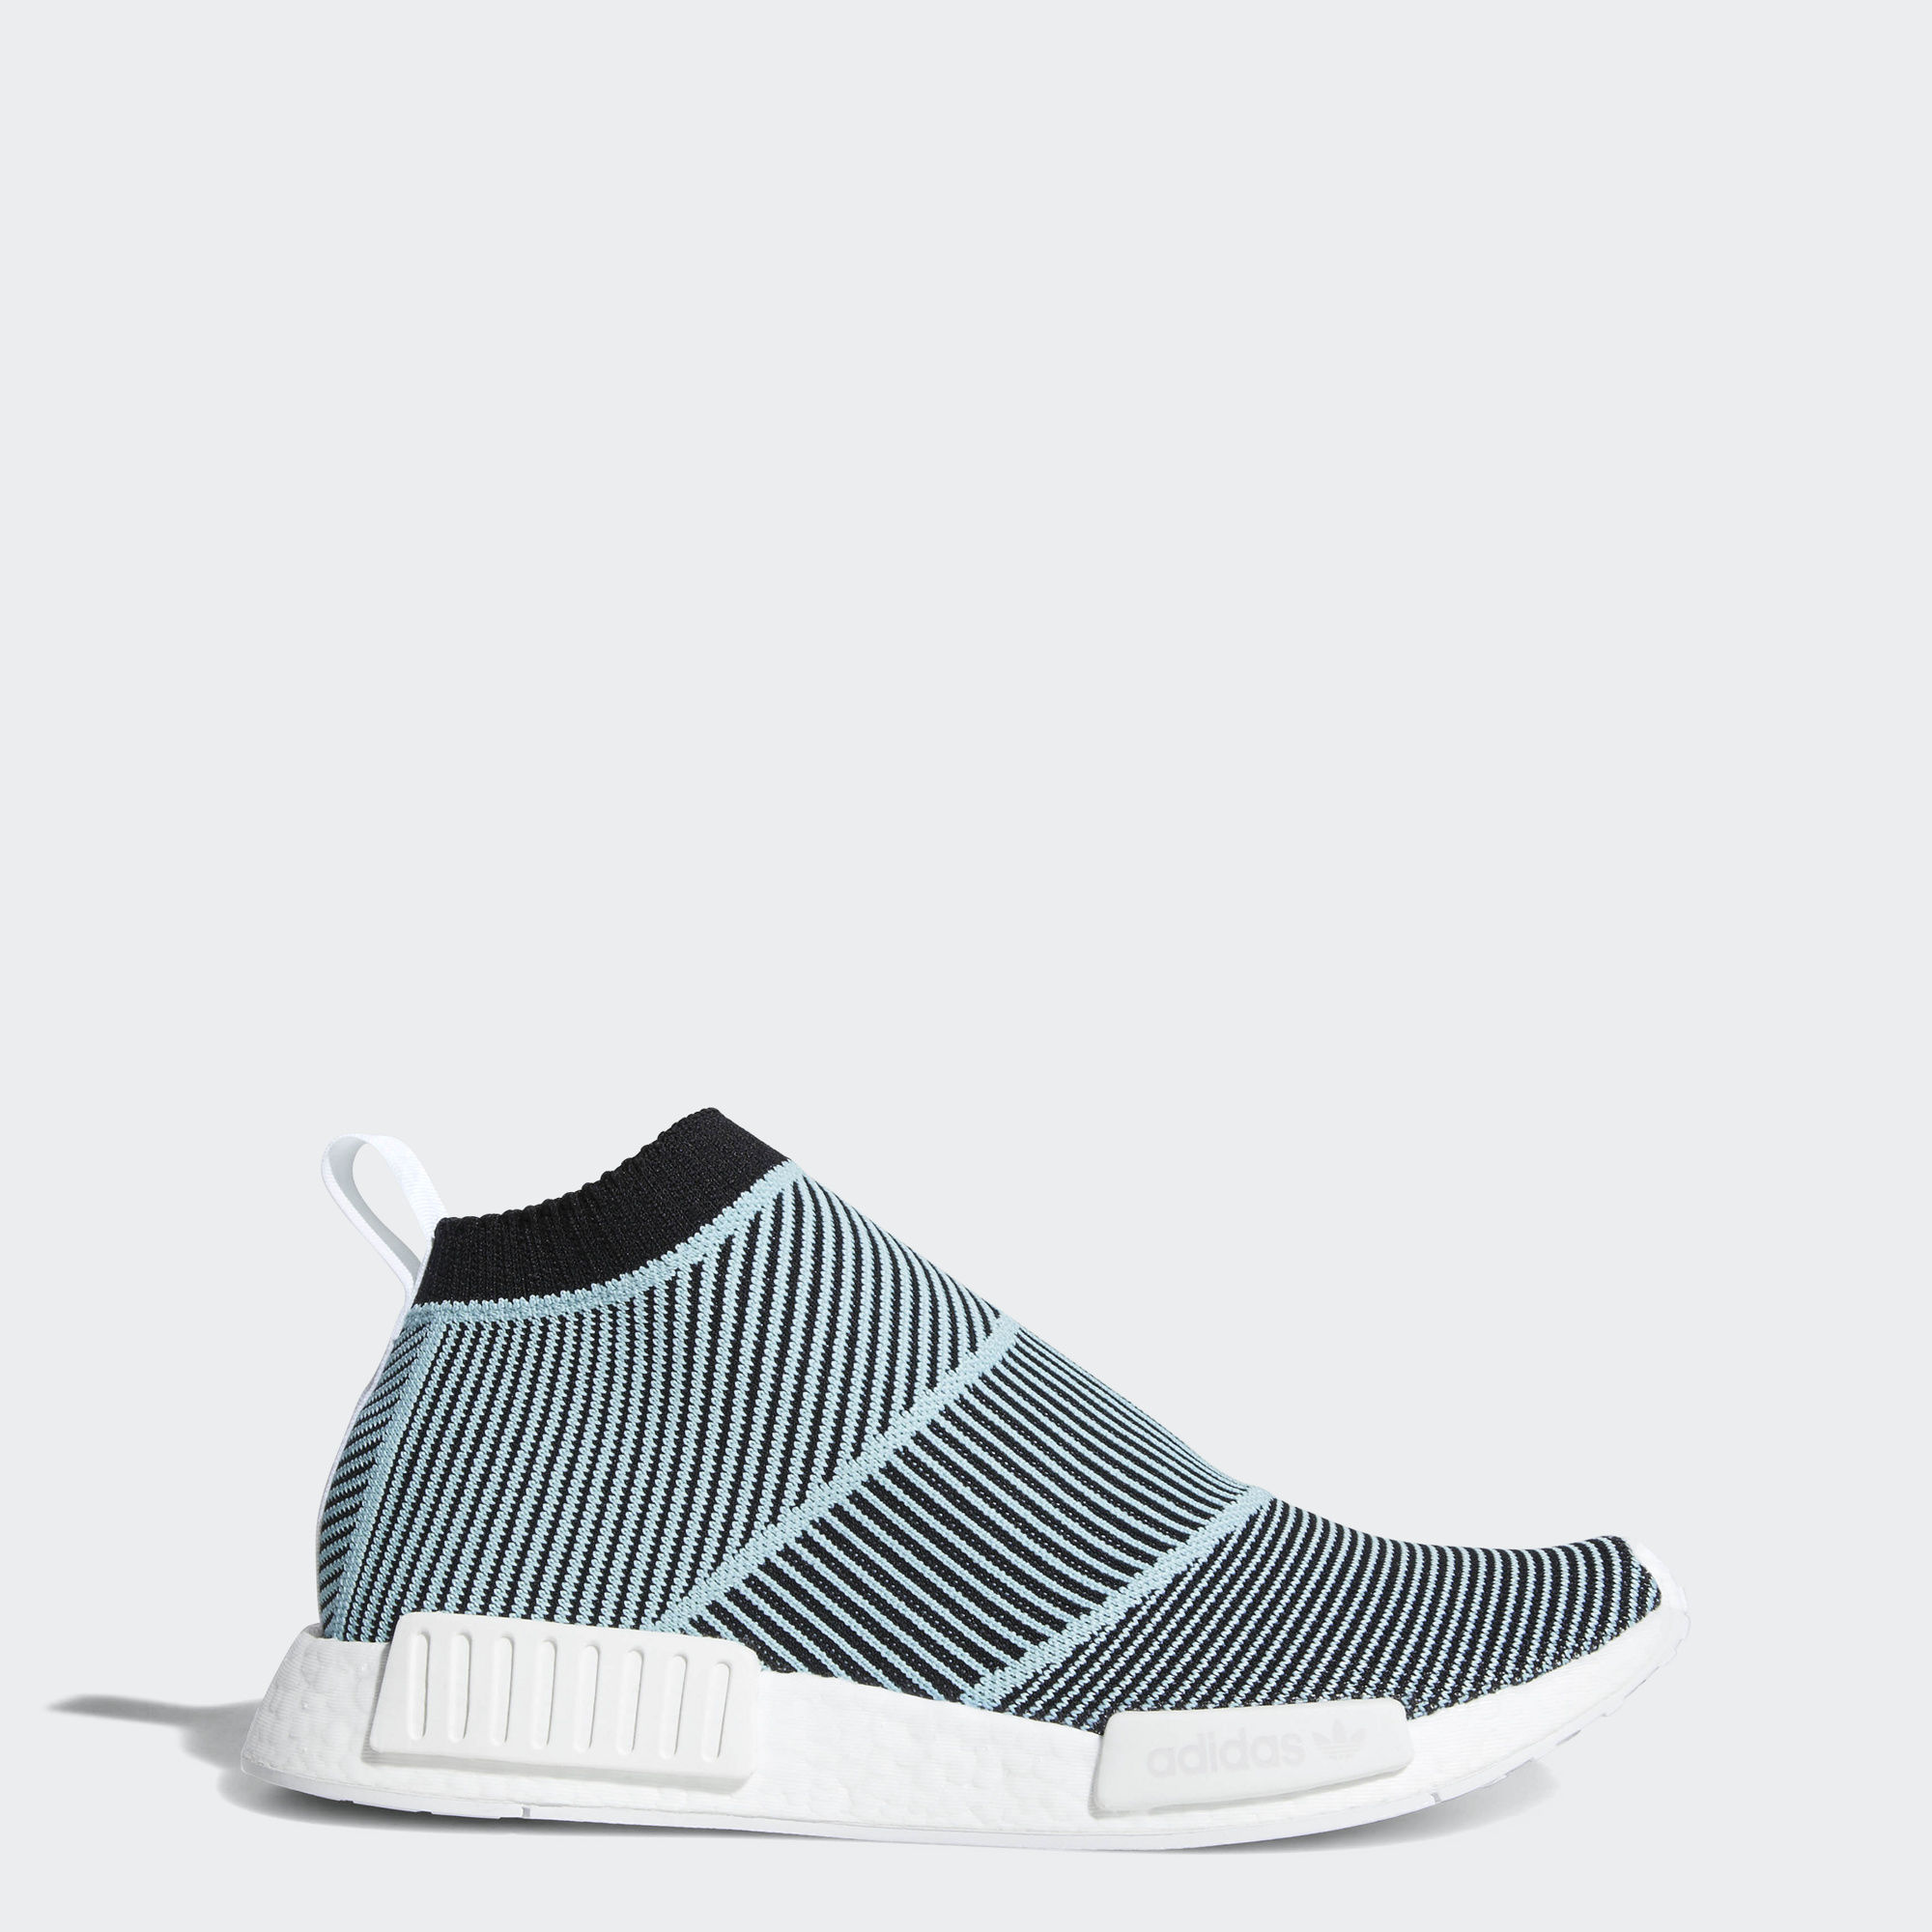 adidas nmd montant